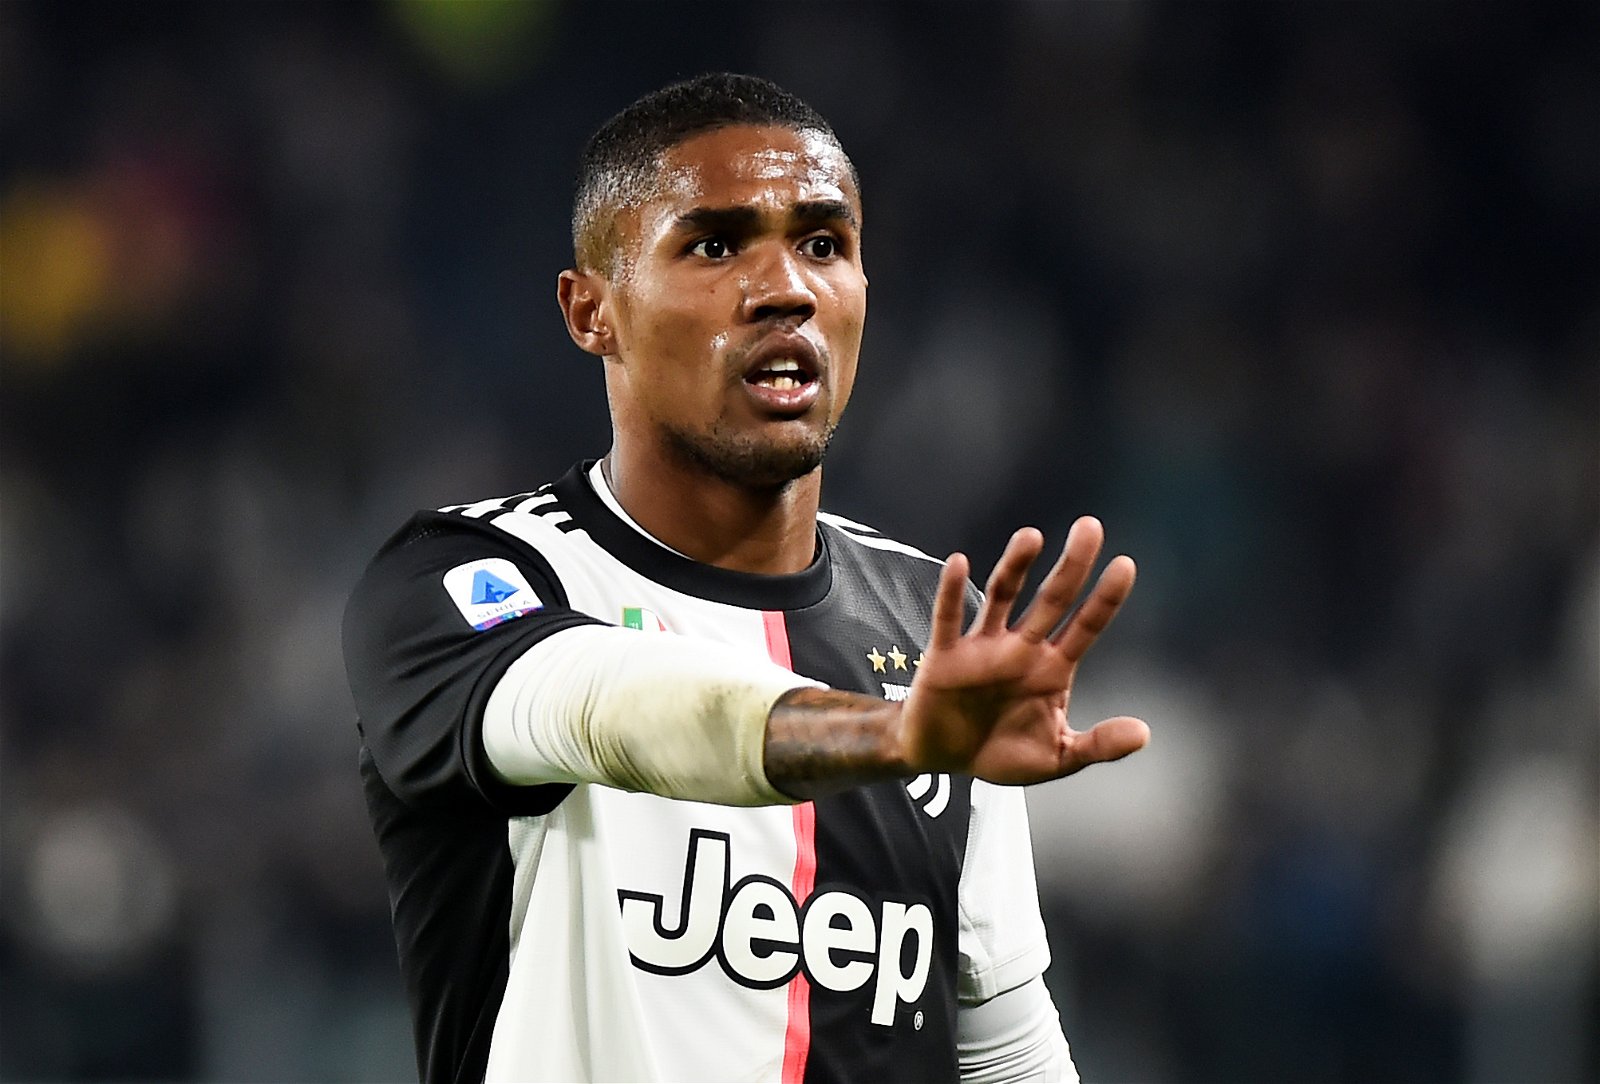 Douglas Costa and Matthijs De Ligt to miss Atletico Madrid clash due to injuries